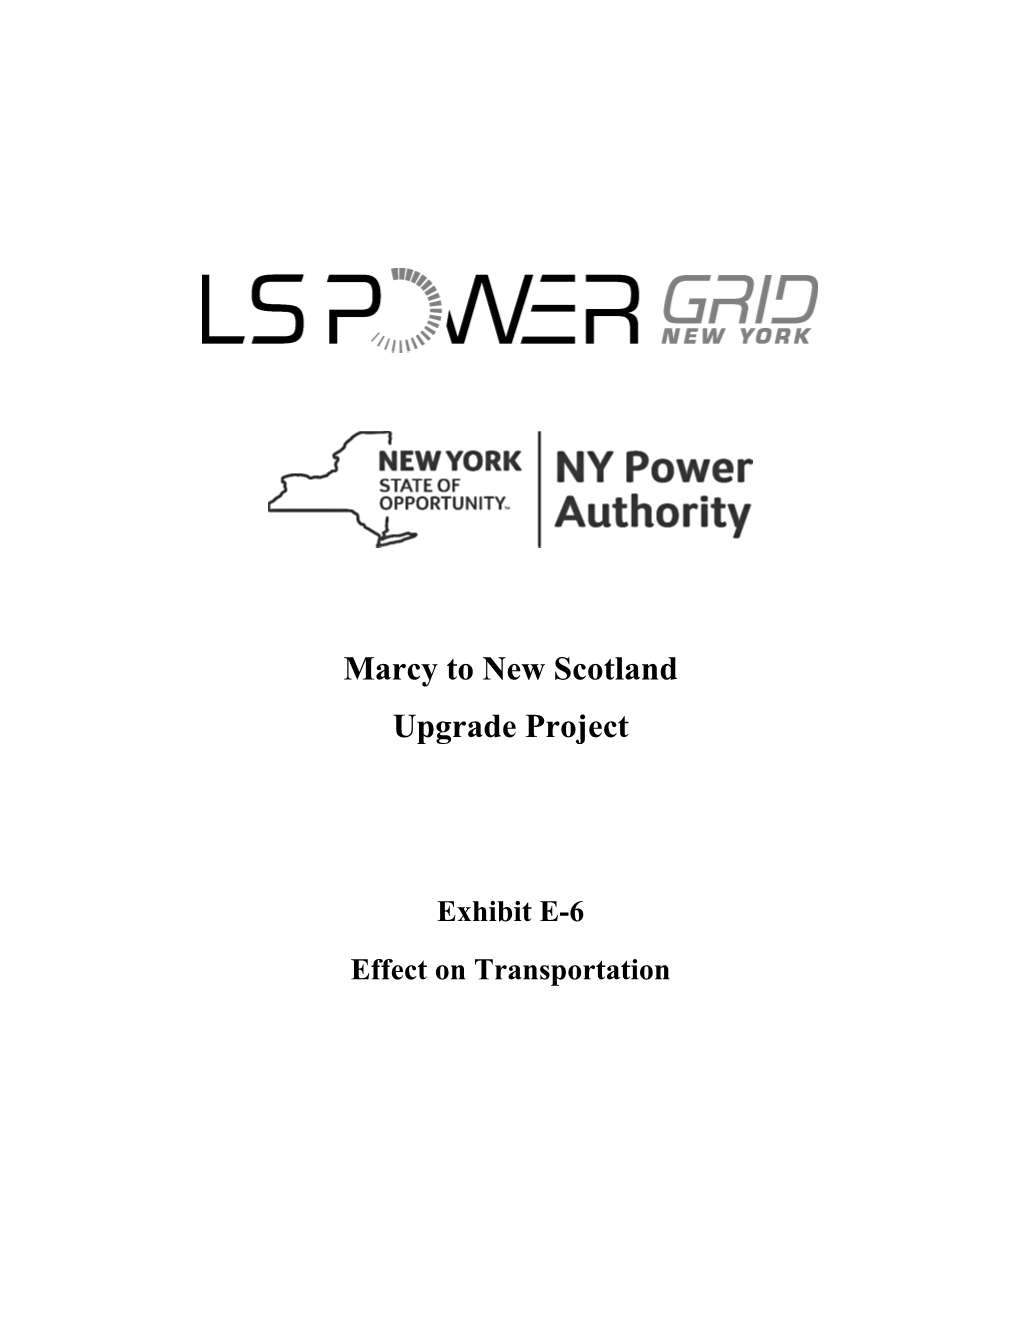 Marcy to New Scotland Upgrade Project